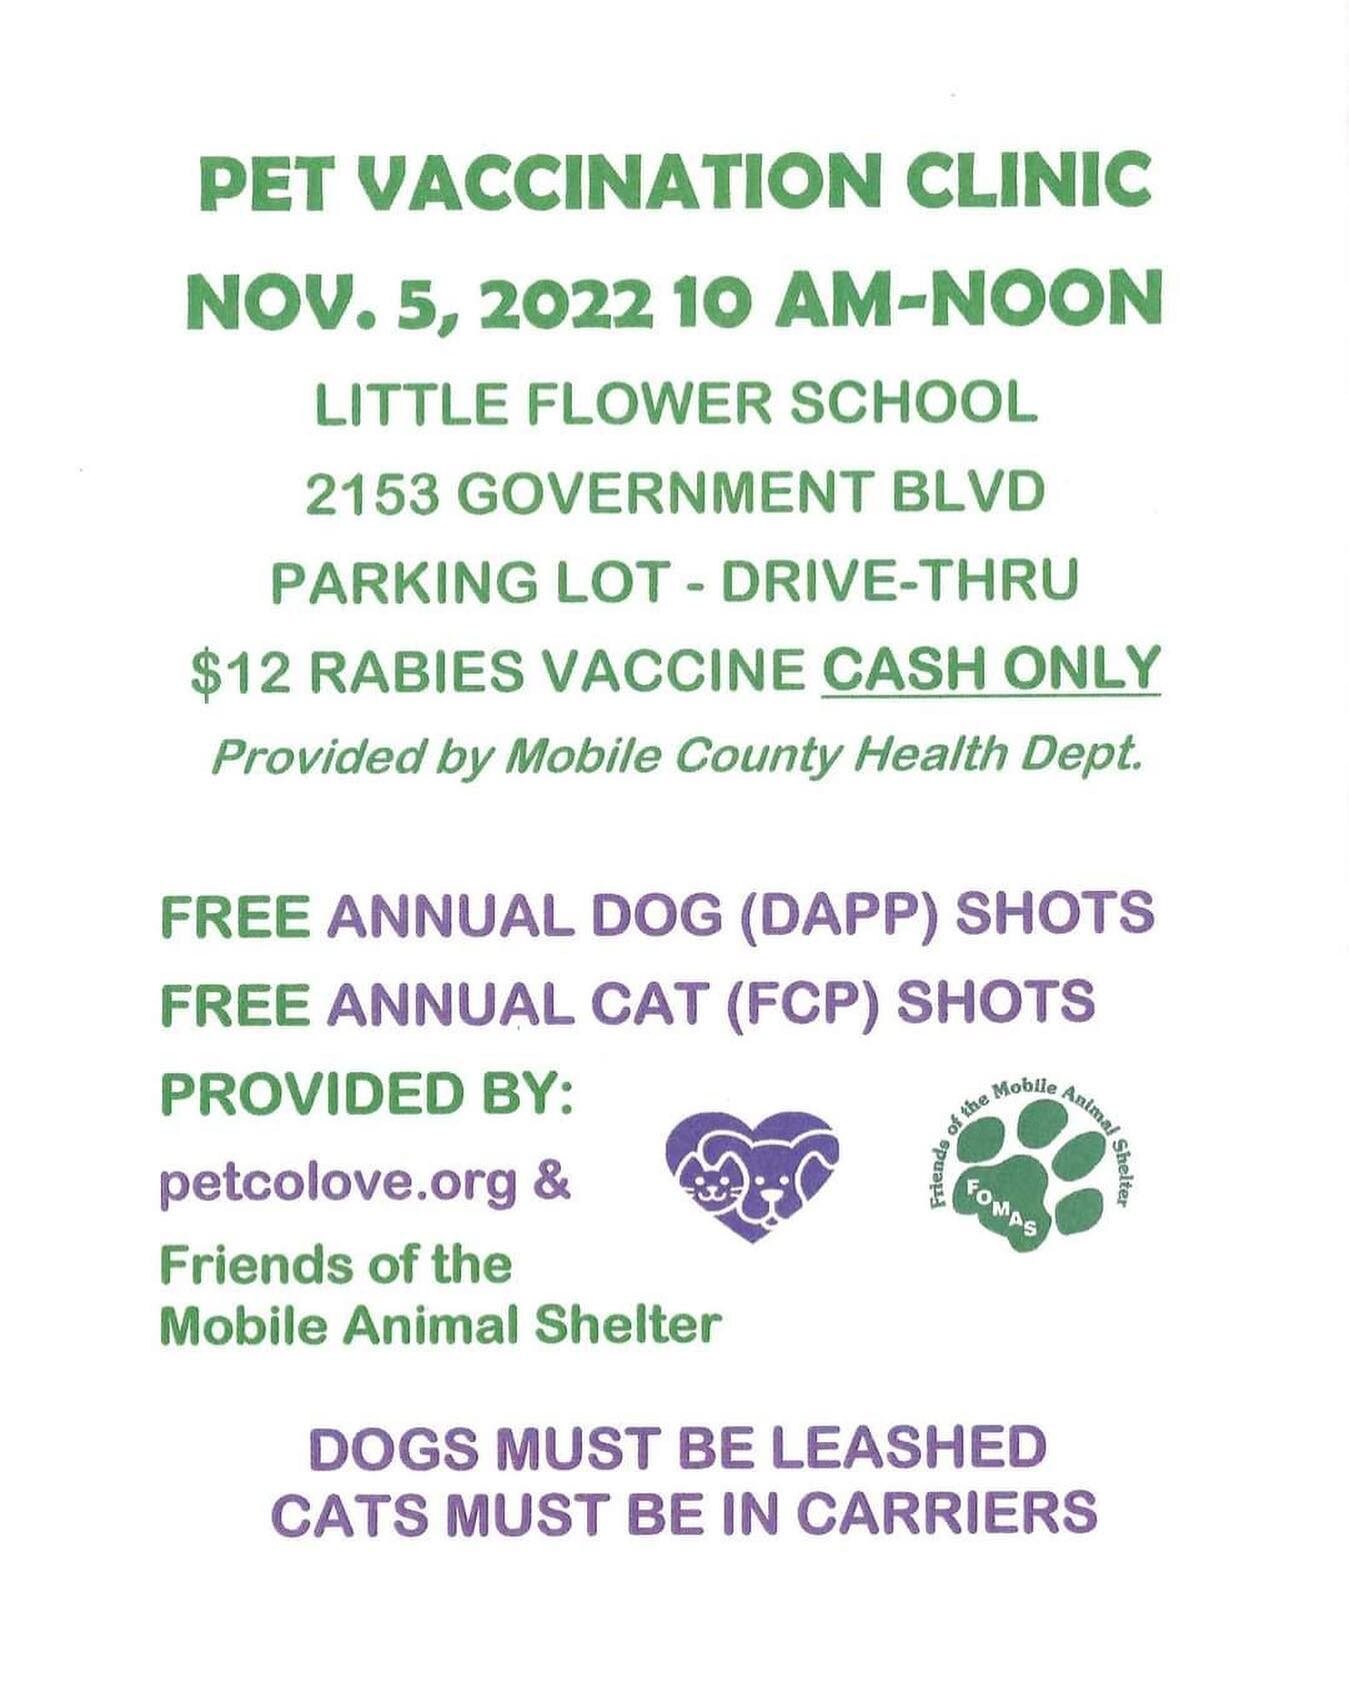 Missed our last vaccination clinic?
Well&hellip; November 5th, you and your dog and/or can come to Little Flower School&rsquo;s parking lot at 10am until Noon to get your pet&rsquo;s annual vaccination and/or $12 Rabies Shot (Cash Only)!!